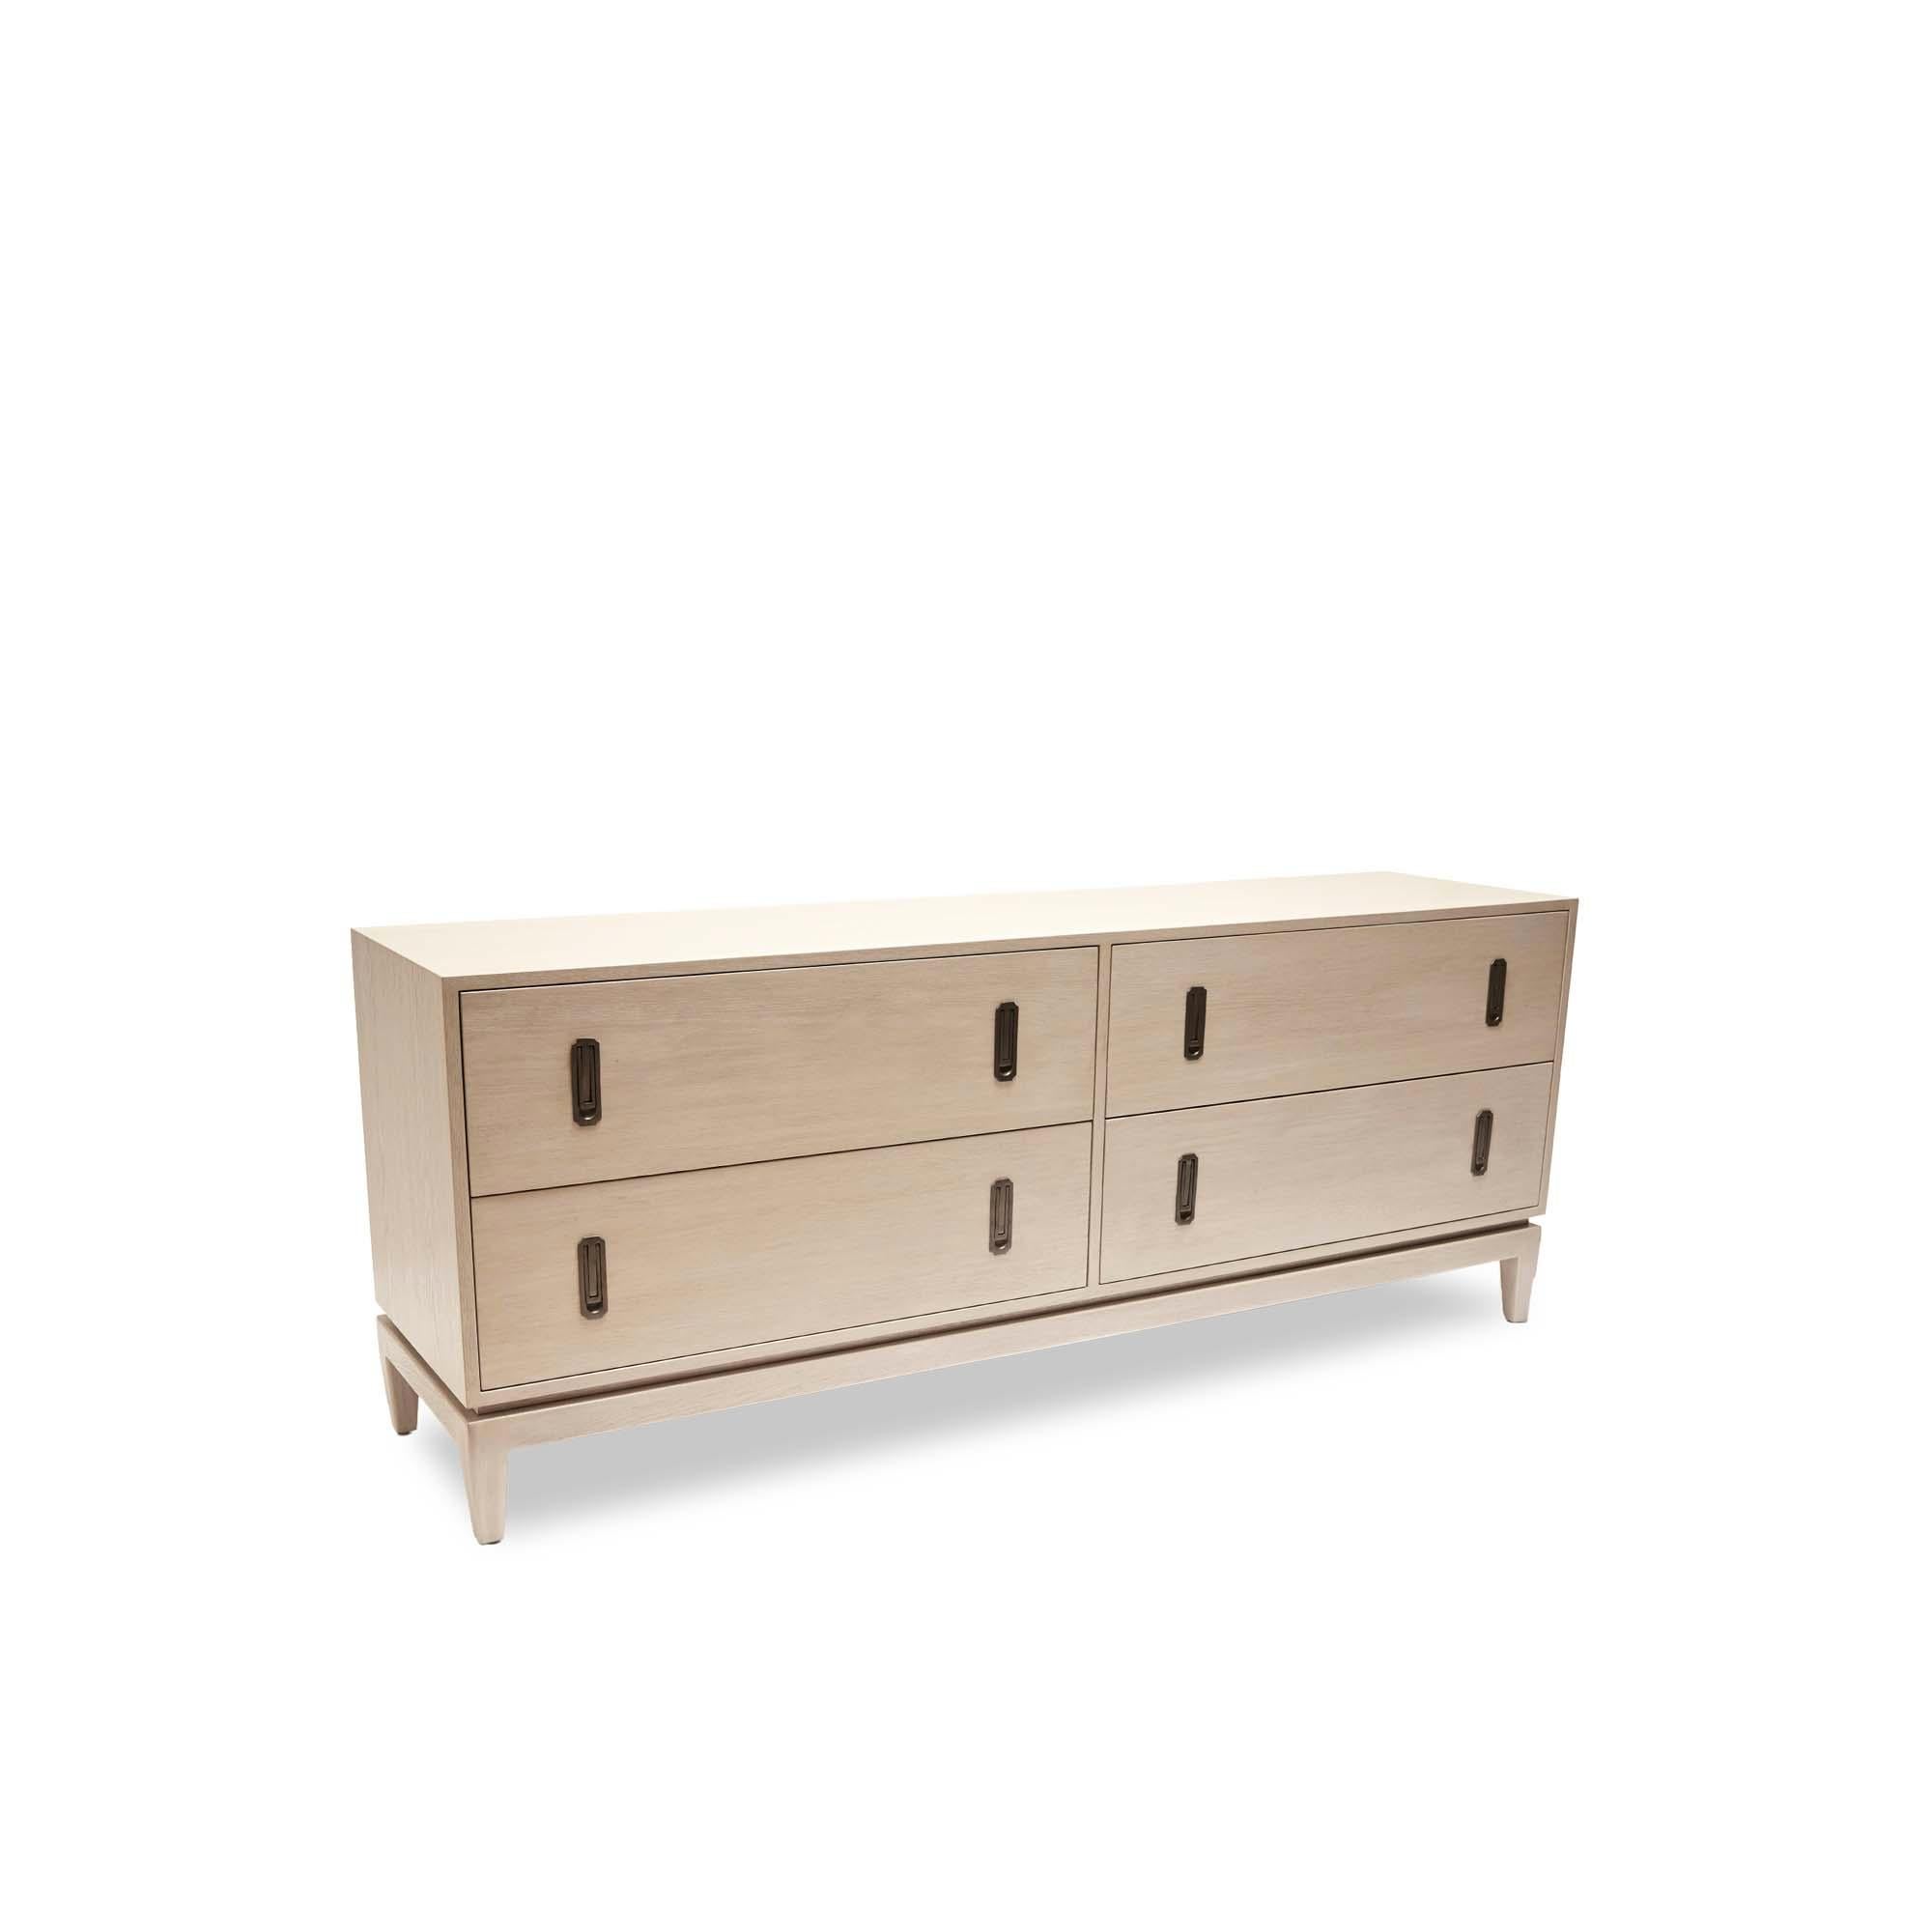 The 4-drawer Arcadia chest features four drawers, cast brass hardware, and a sculptural solid American walnut or white oak base. 

The Lawson-Fenning Collection is designed and handmade in Los Angeles, California. Reach out to discover what